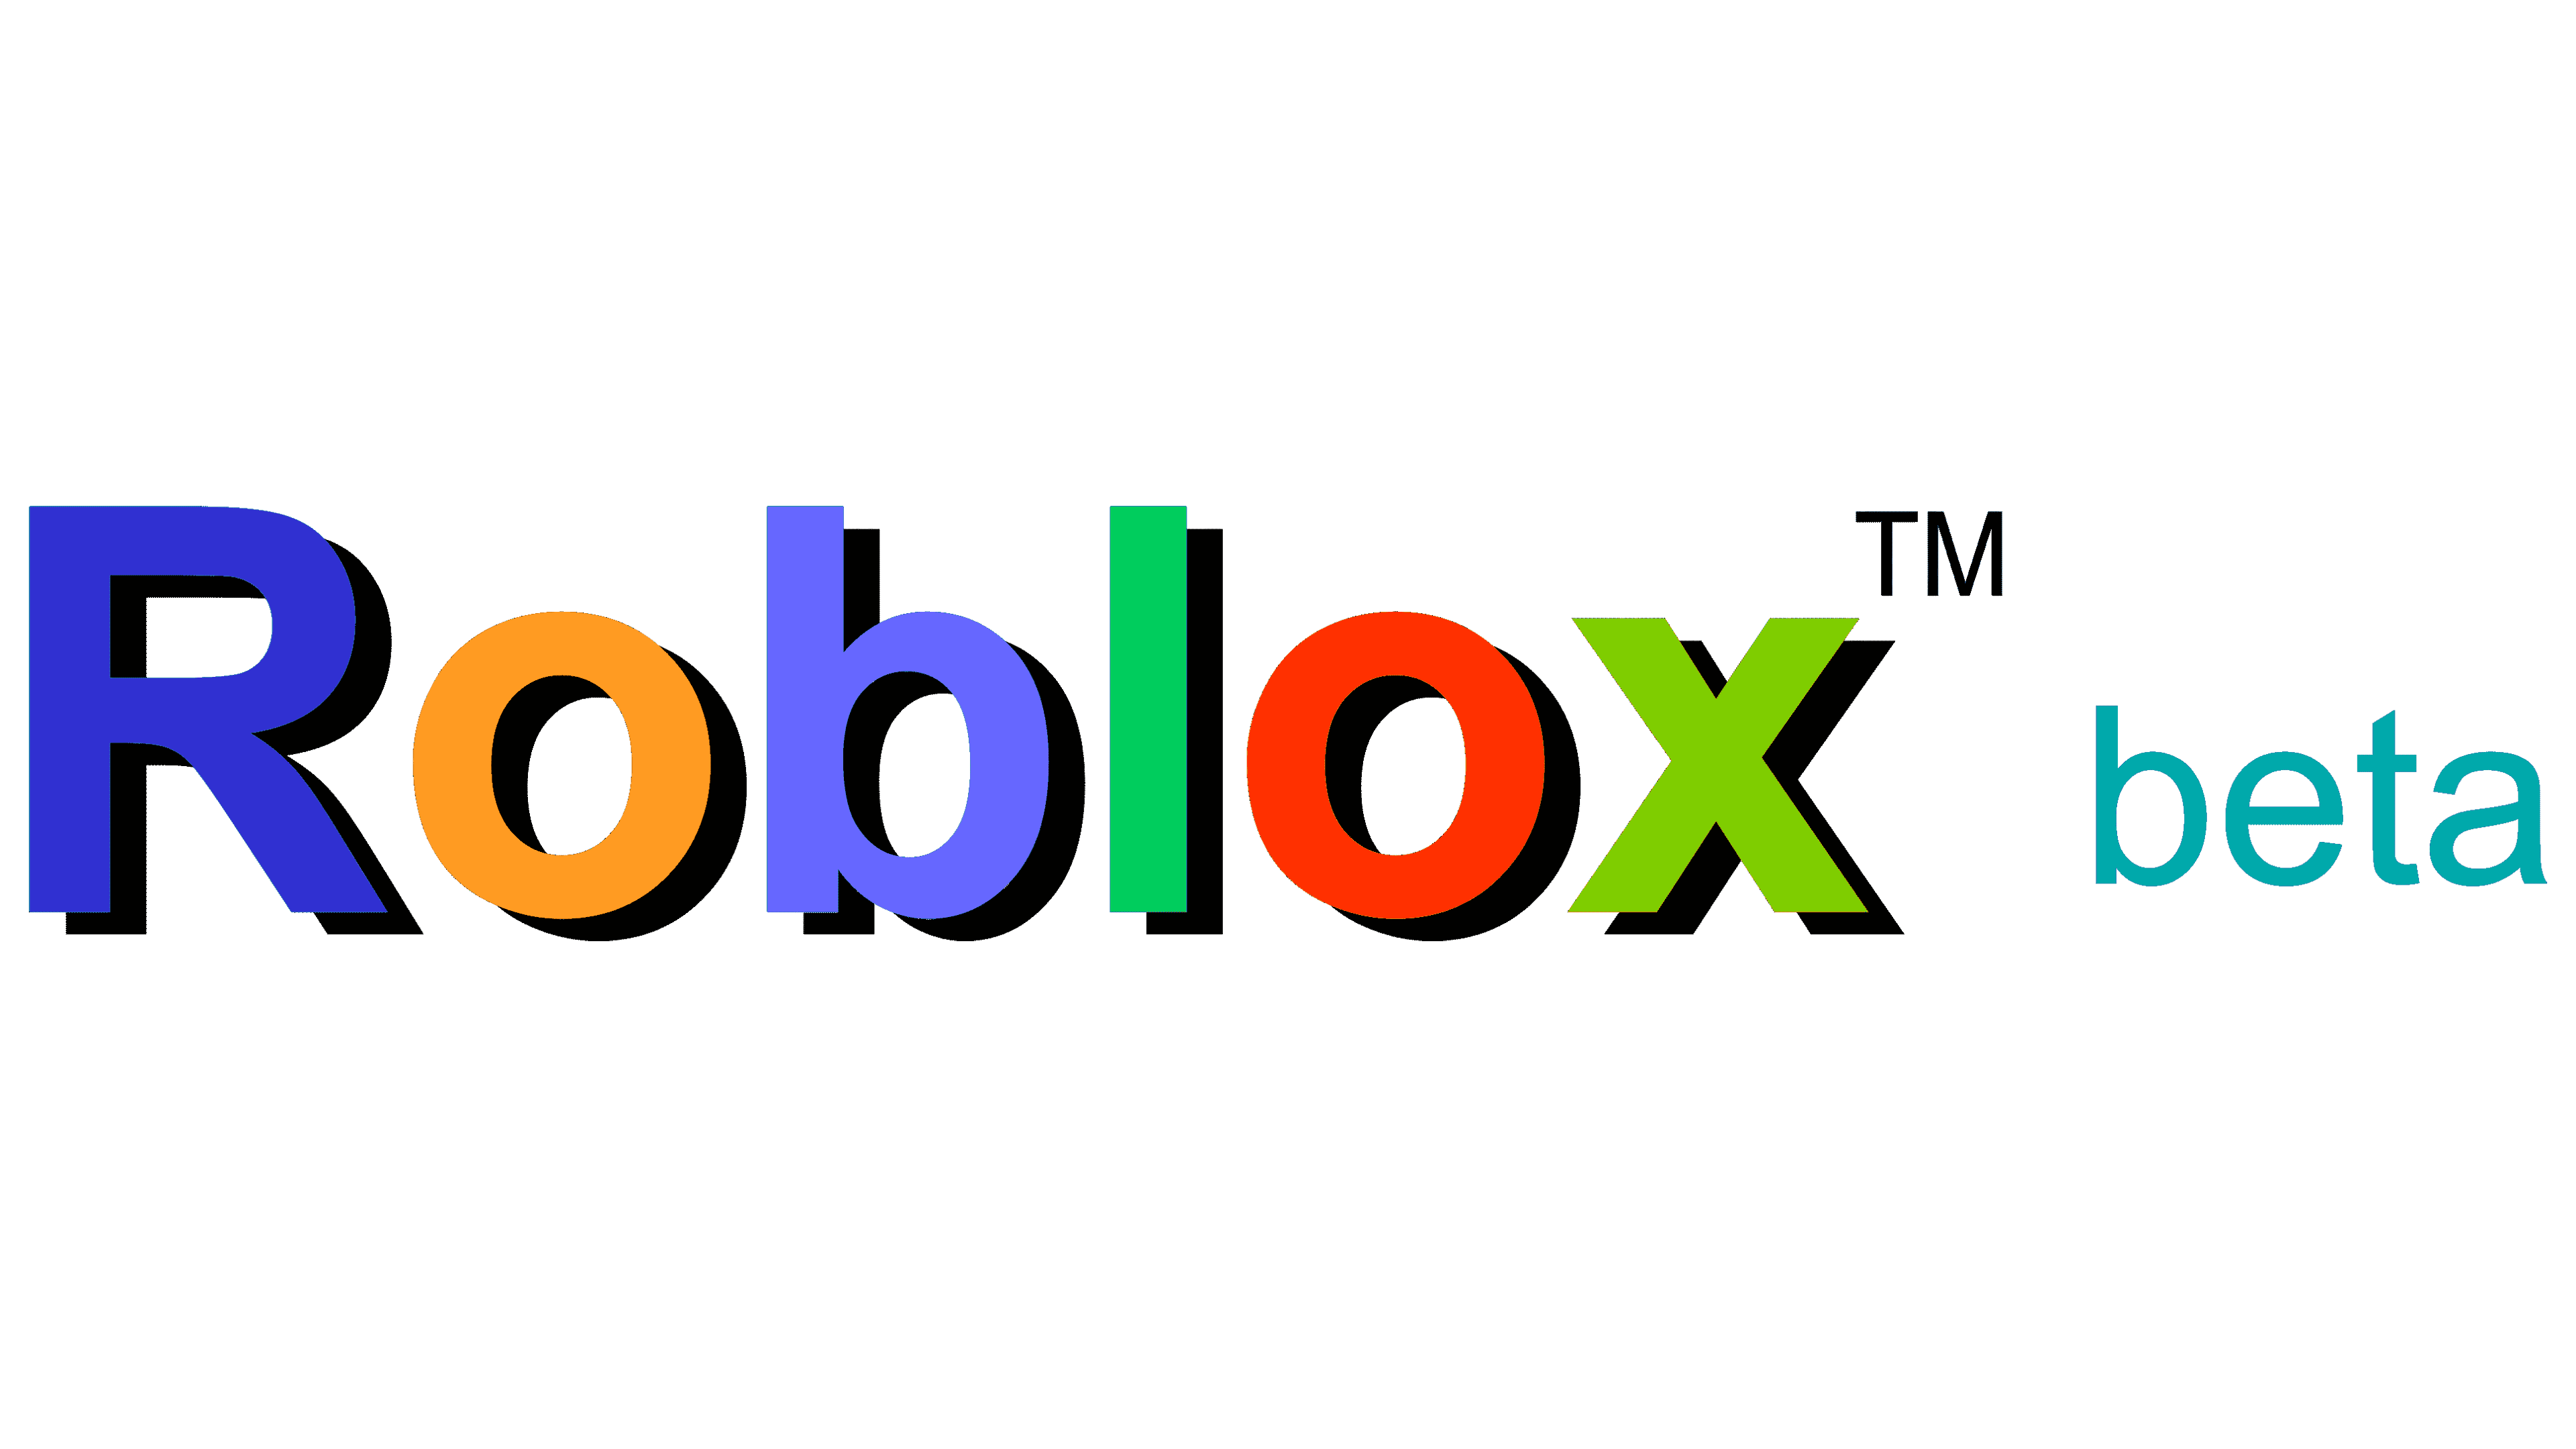 Roblox Logo and sign, new logo meaning and history, PNG, SVG